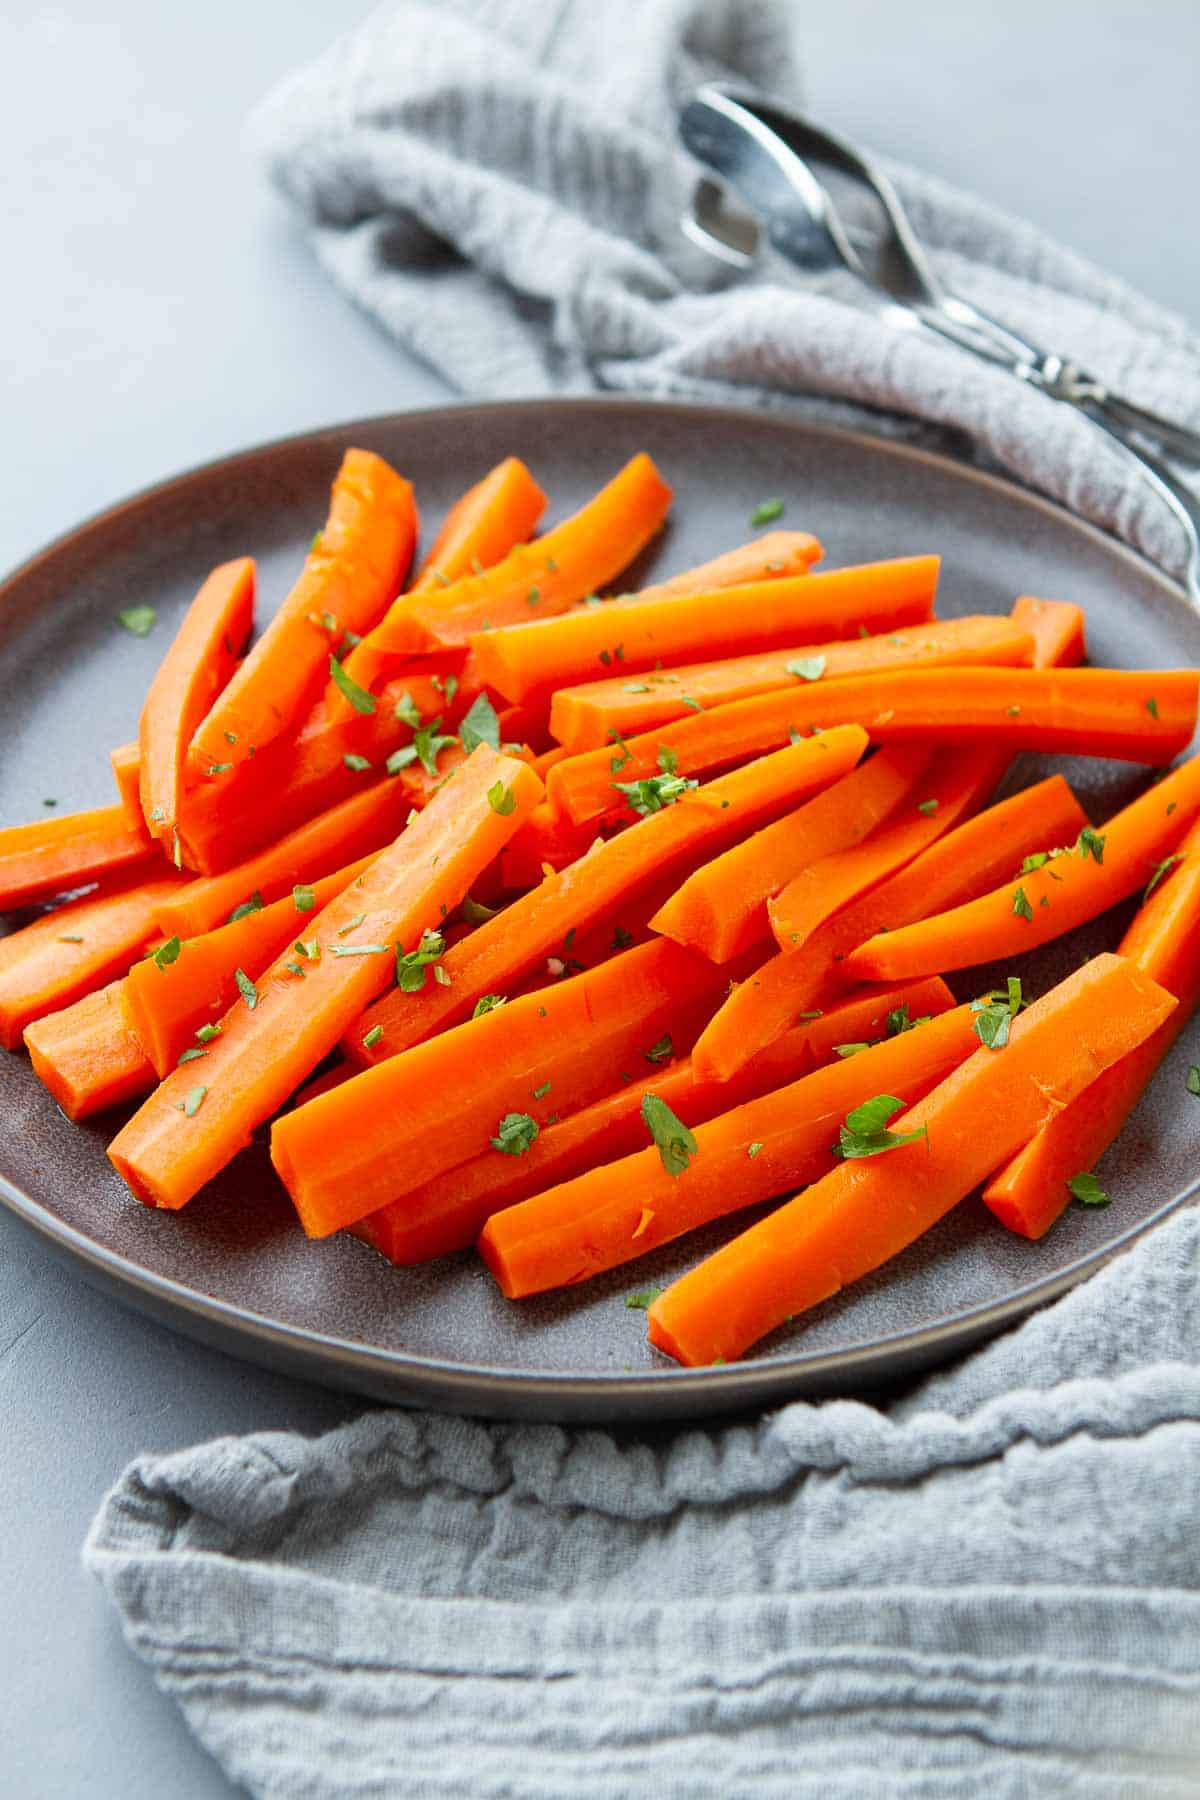 Learn how to steam carrots for an easy, healthy side dish. Enjoy tender (not mushy!) steamed carrots that retain their nutrients and bright color.  | In Microwave | On the stove | Stovetop